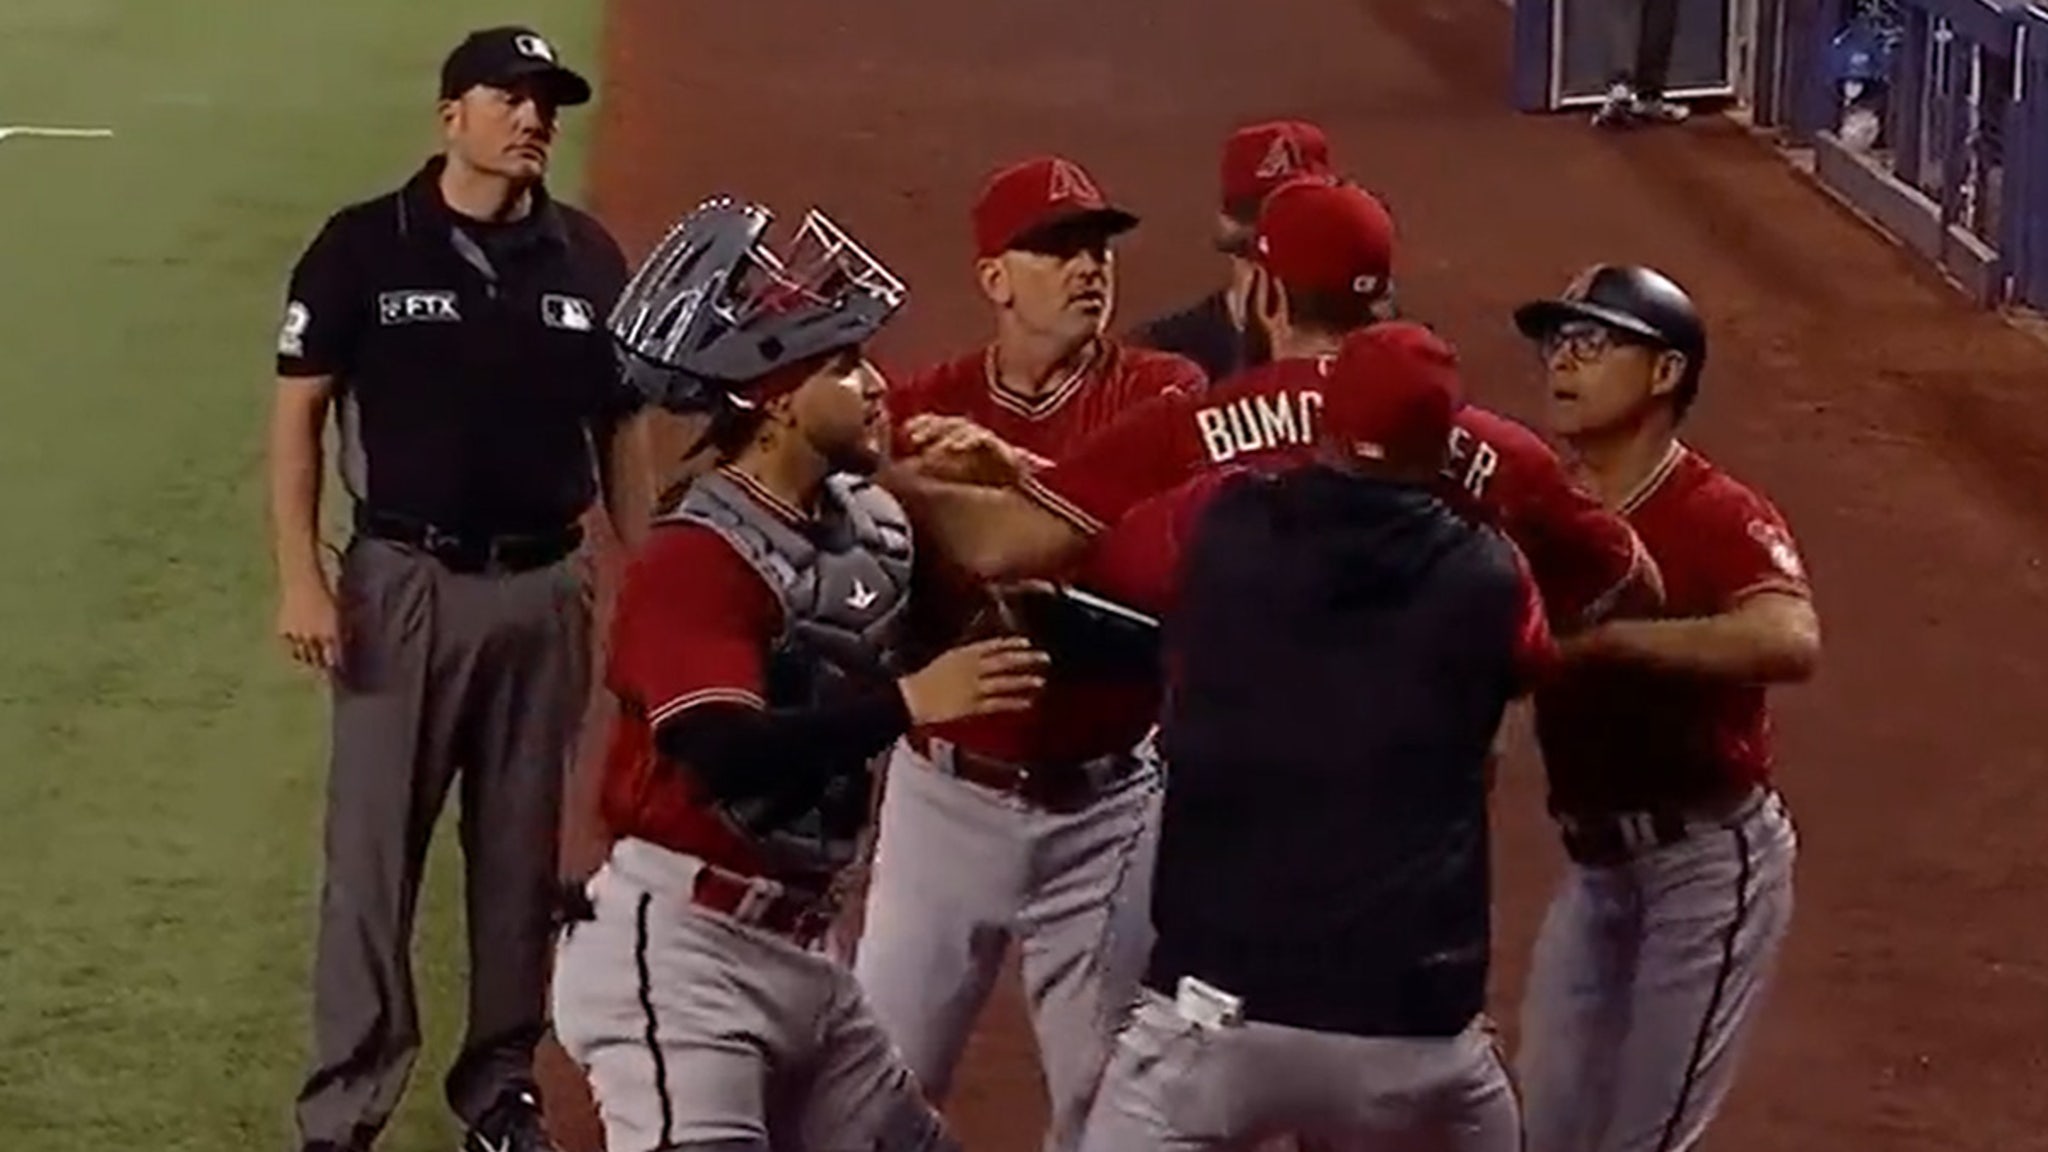 Madison Bumgarner Irate With Ump After Ejection, Physically Restrained By Teammates - TMZ